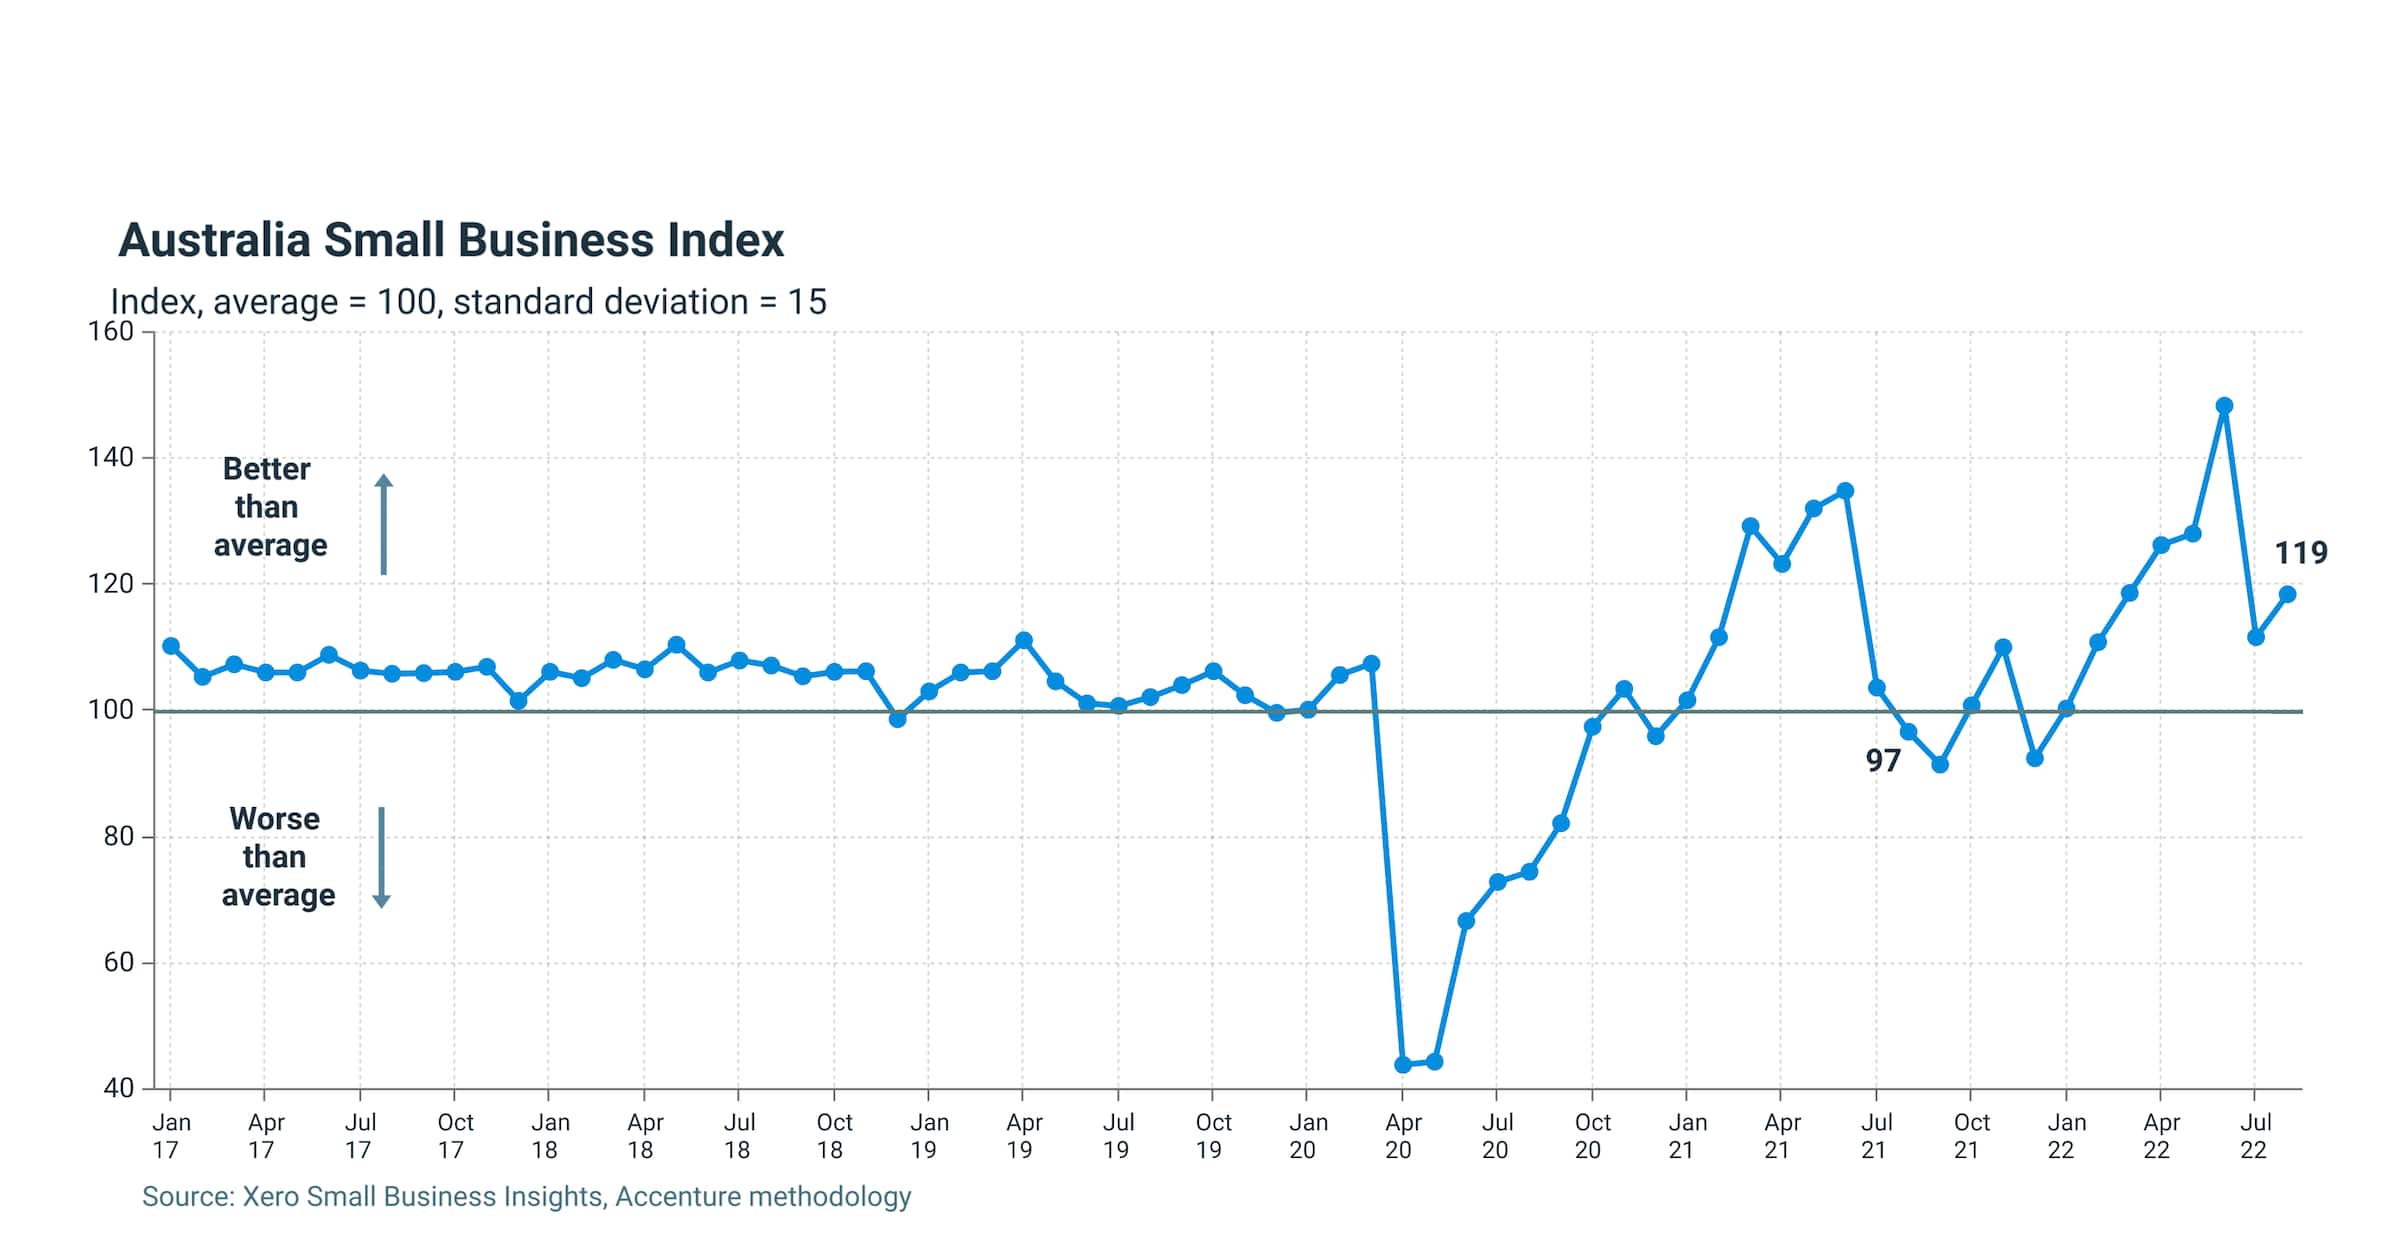 Graph of Australia Small Business Index showing an increase of 7 points